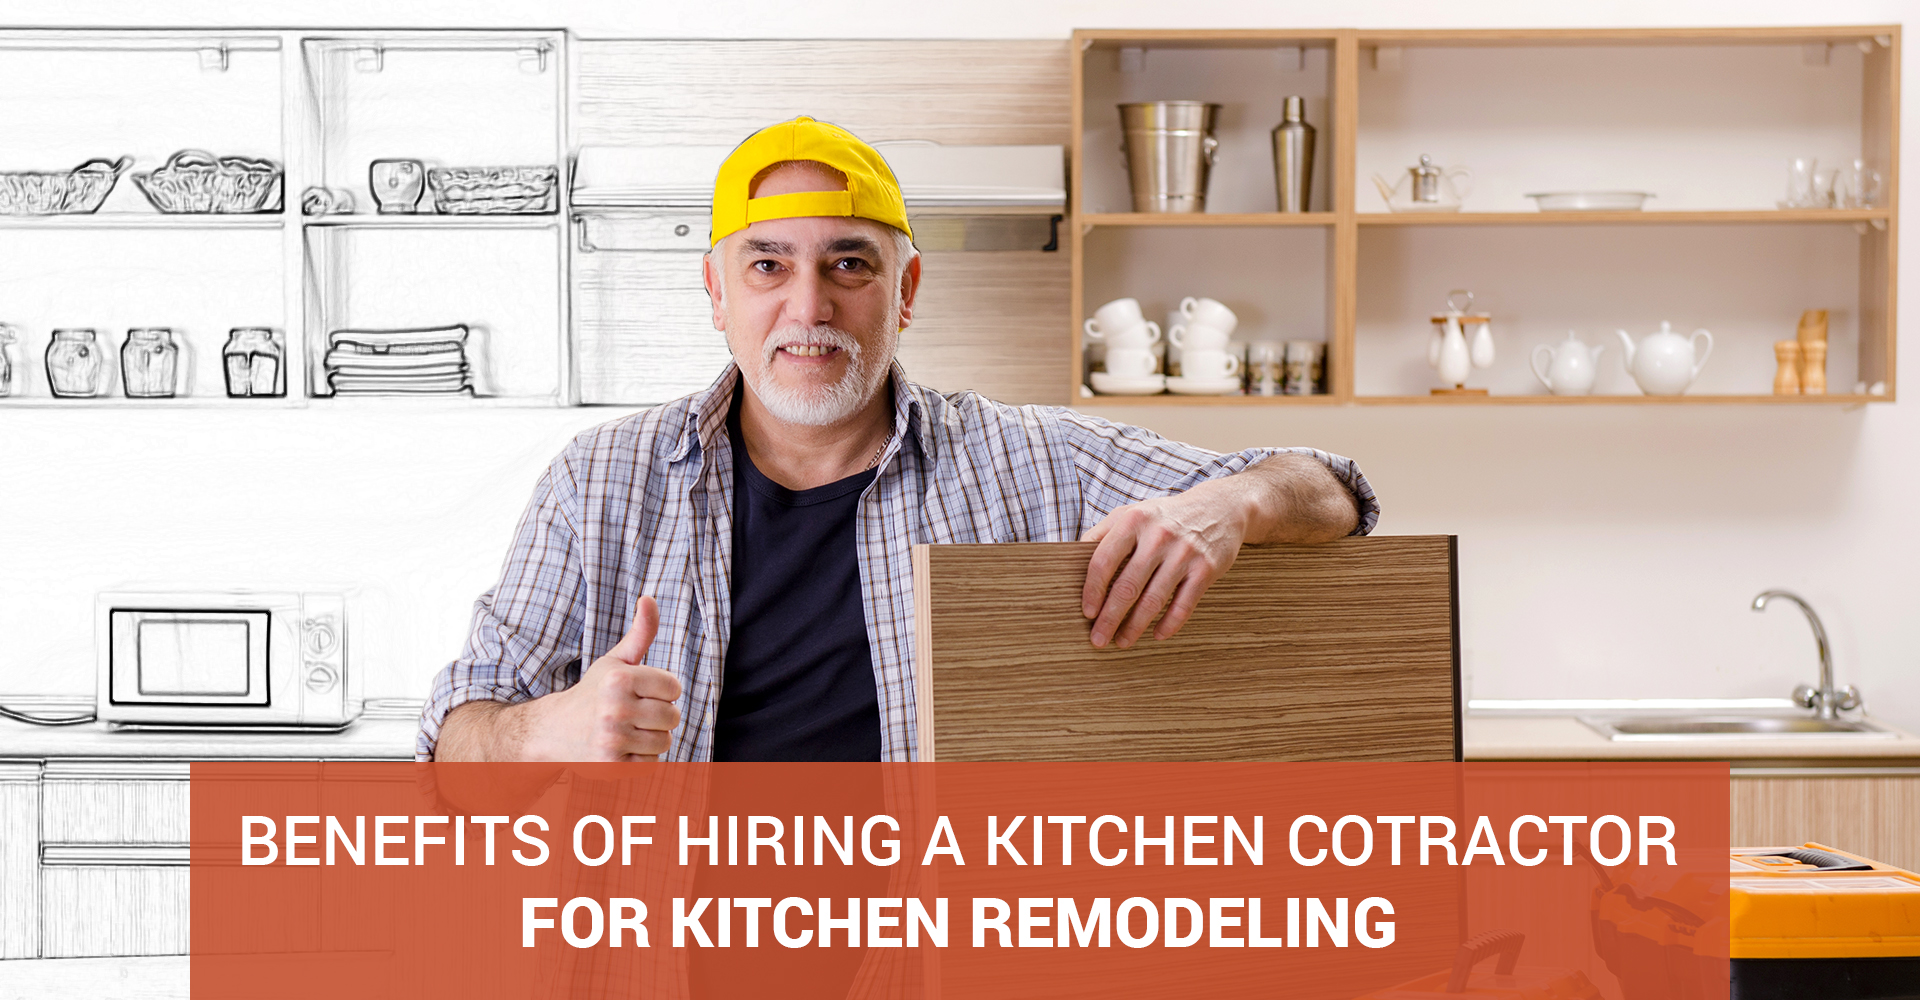 Benefits of Hiring A Kitchen Contractor For Kitchen Remodeling